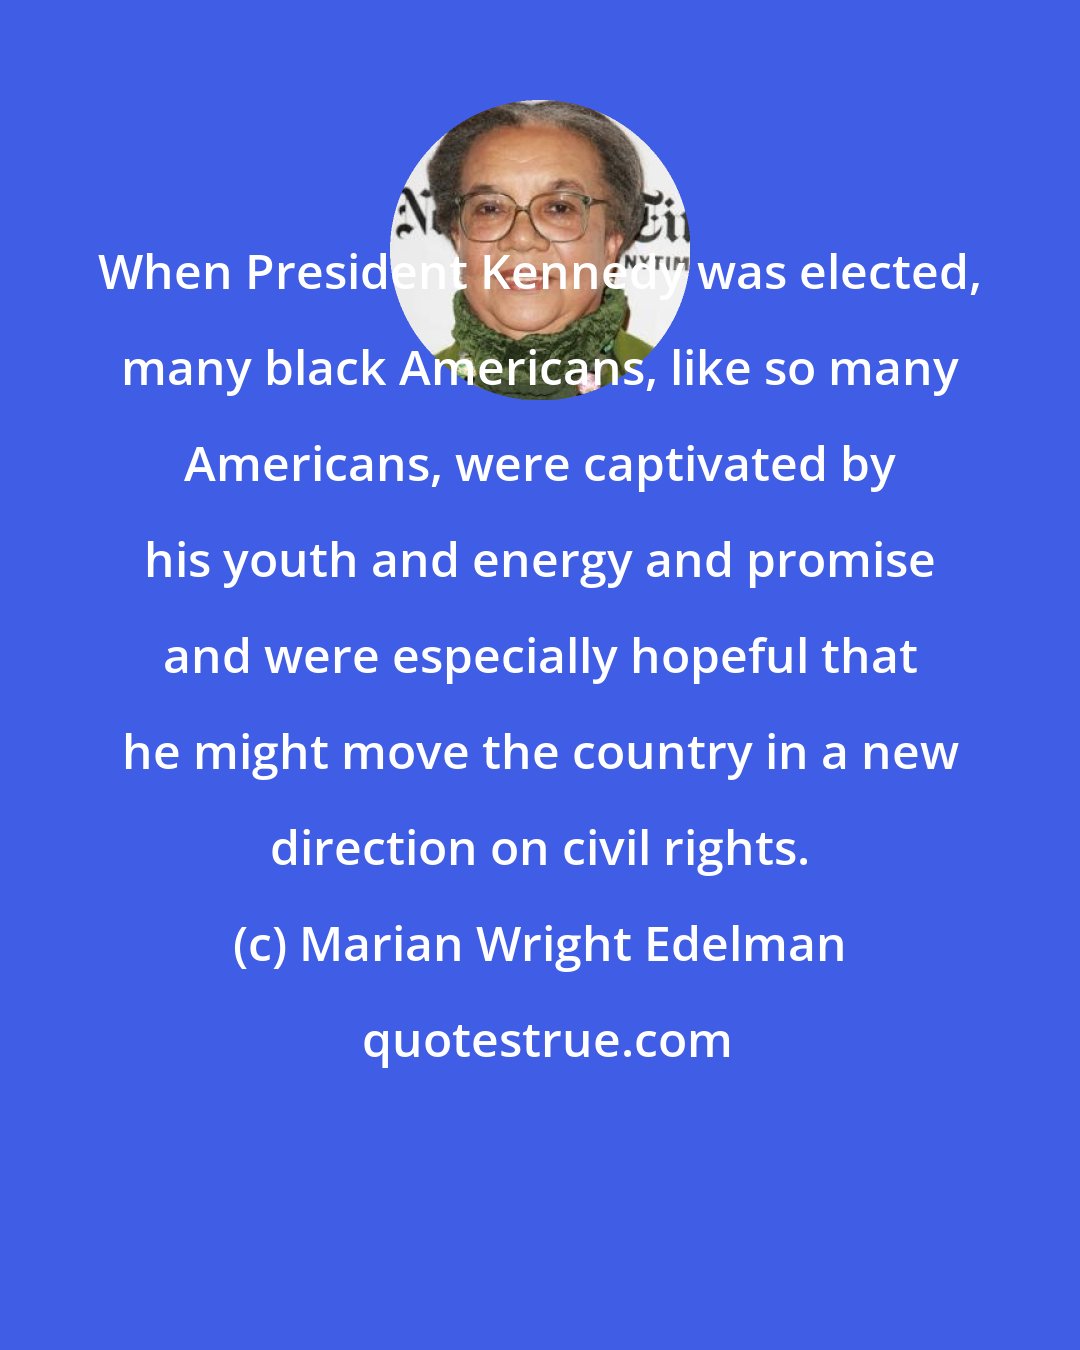 Marian Wright Edelman: When President Kennedy was elected, many black Americans, like so many Americans, were captivated by his youth and energy and promise and were especially hopeful that he might move the country in a new direction on civil rights.